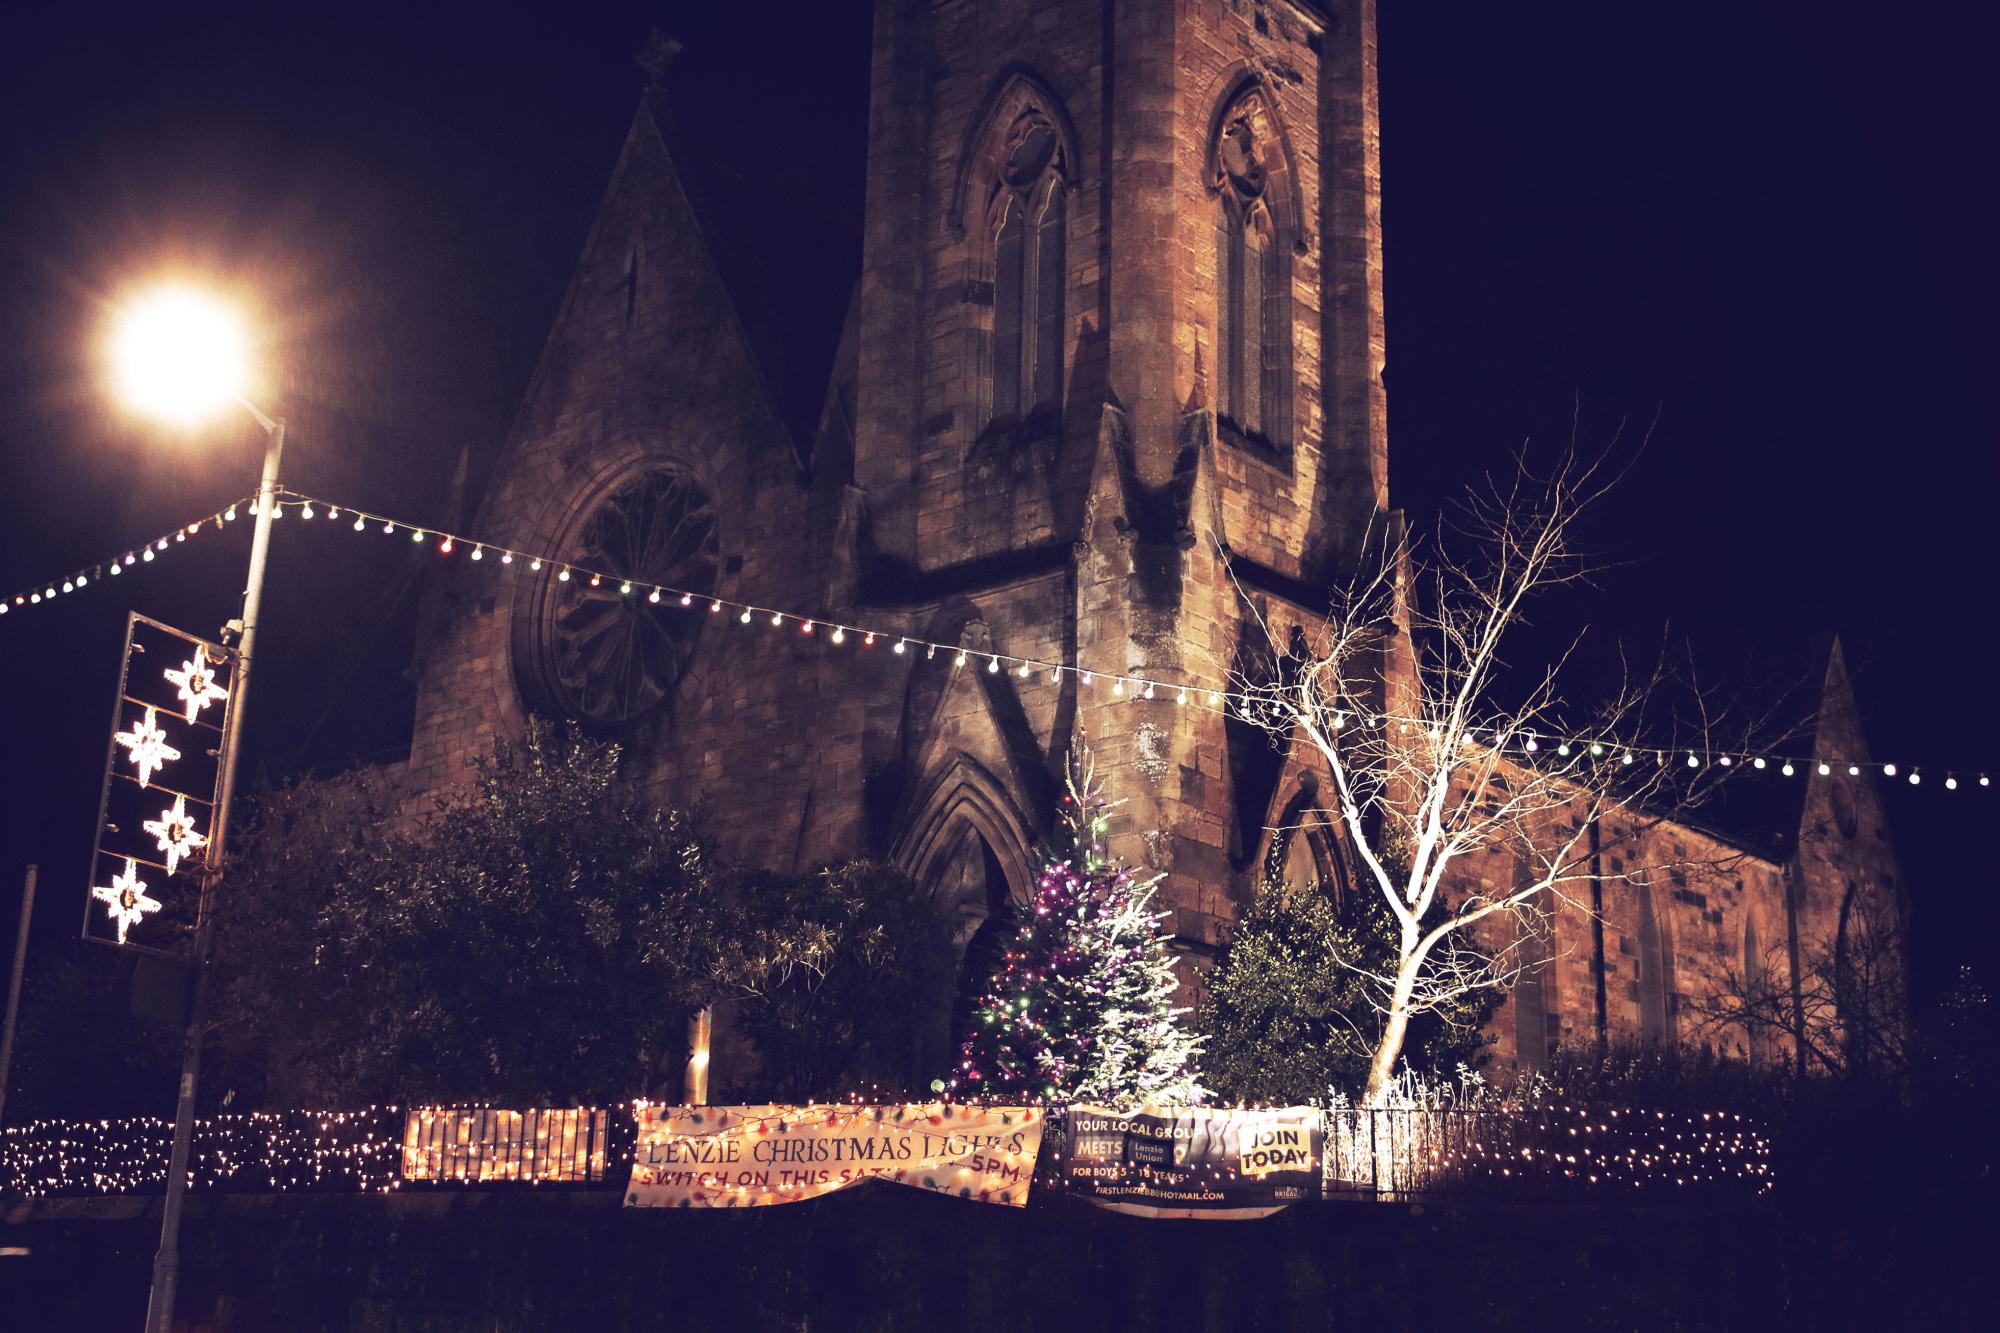 The community Christmas tree in the church grounds surrounded by fairy lights and street decorations